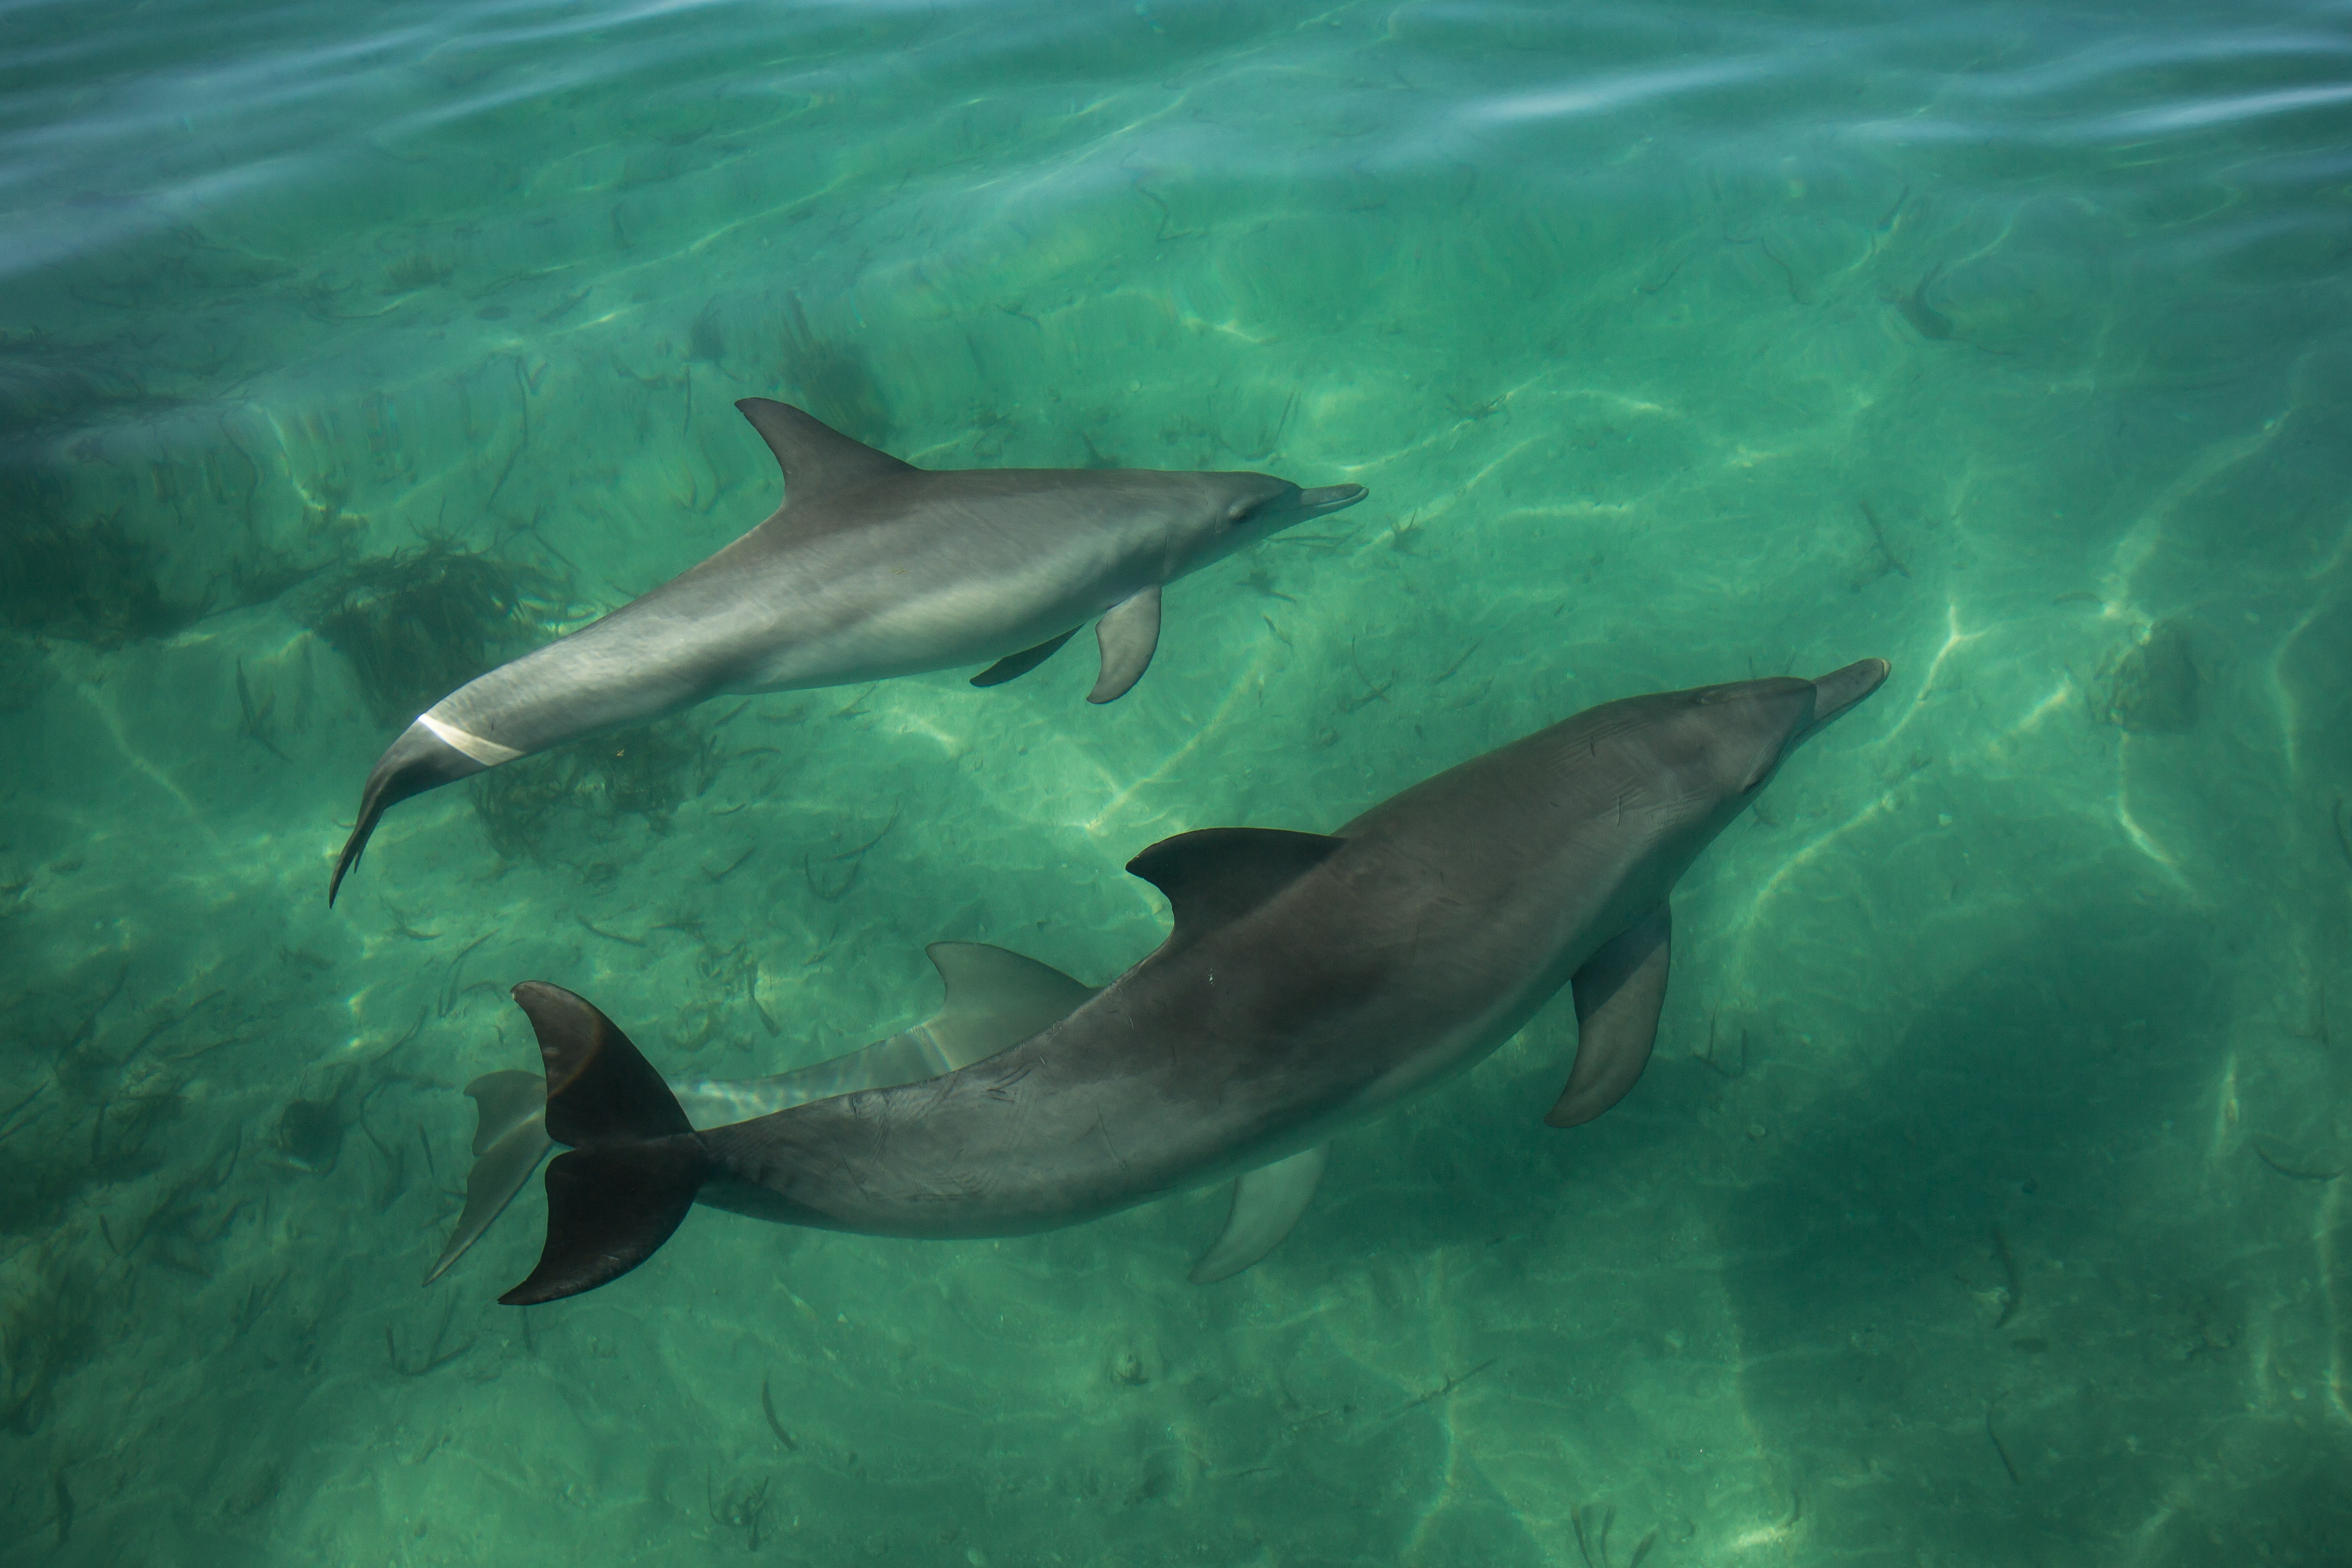 Shelling out for dinner – Dolphins learn foraging skills from peers